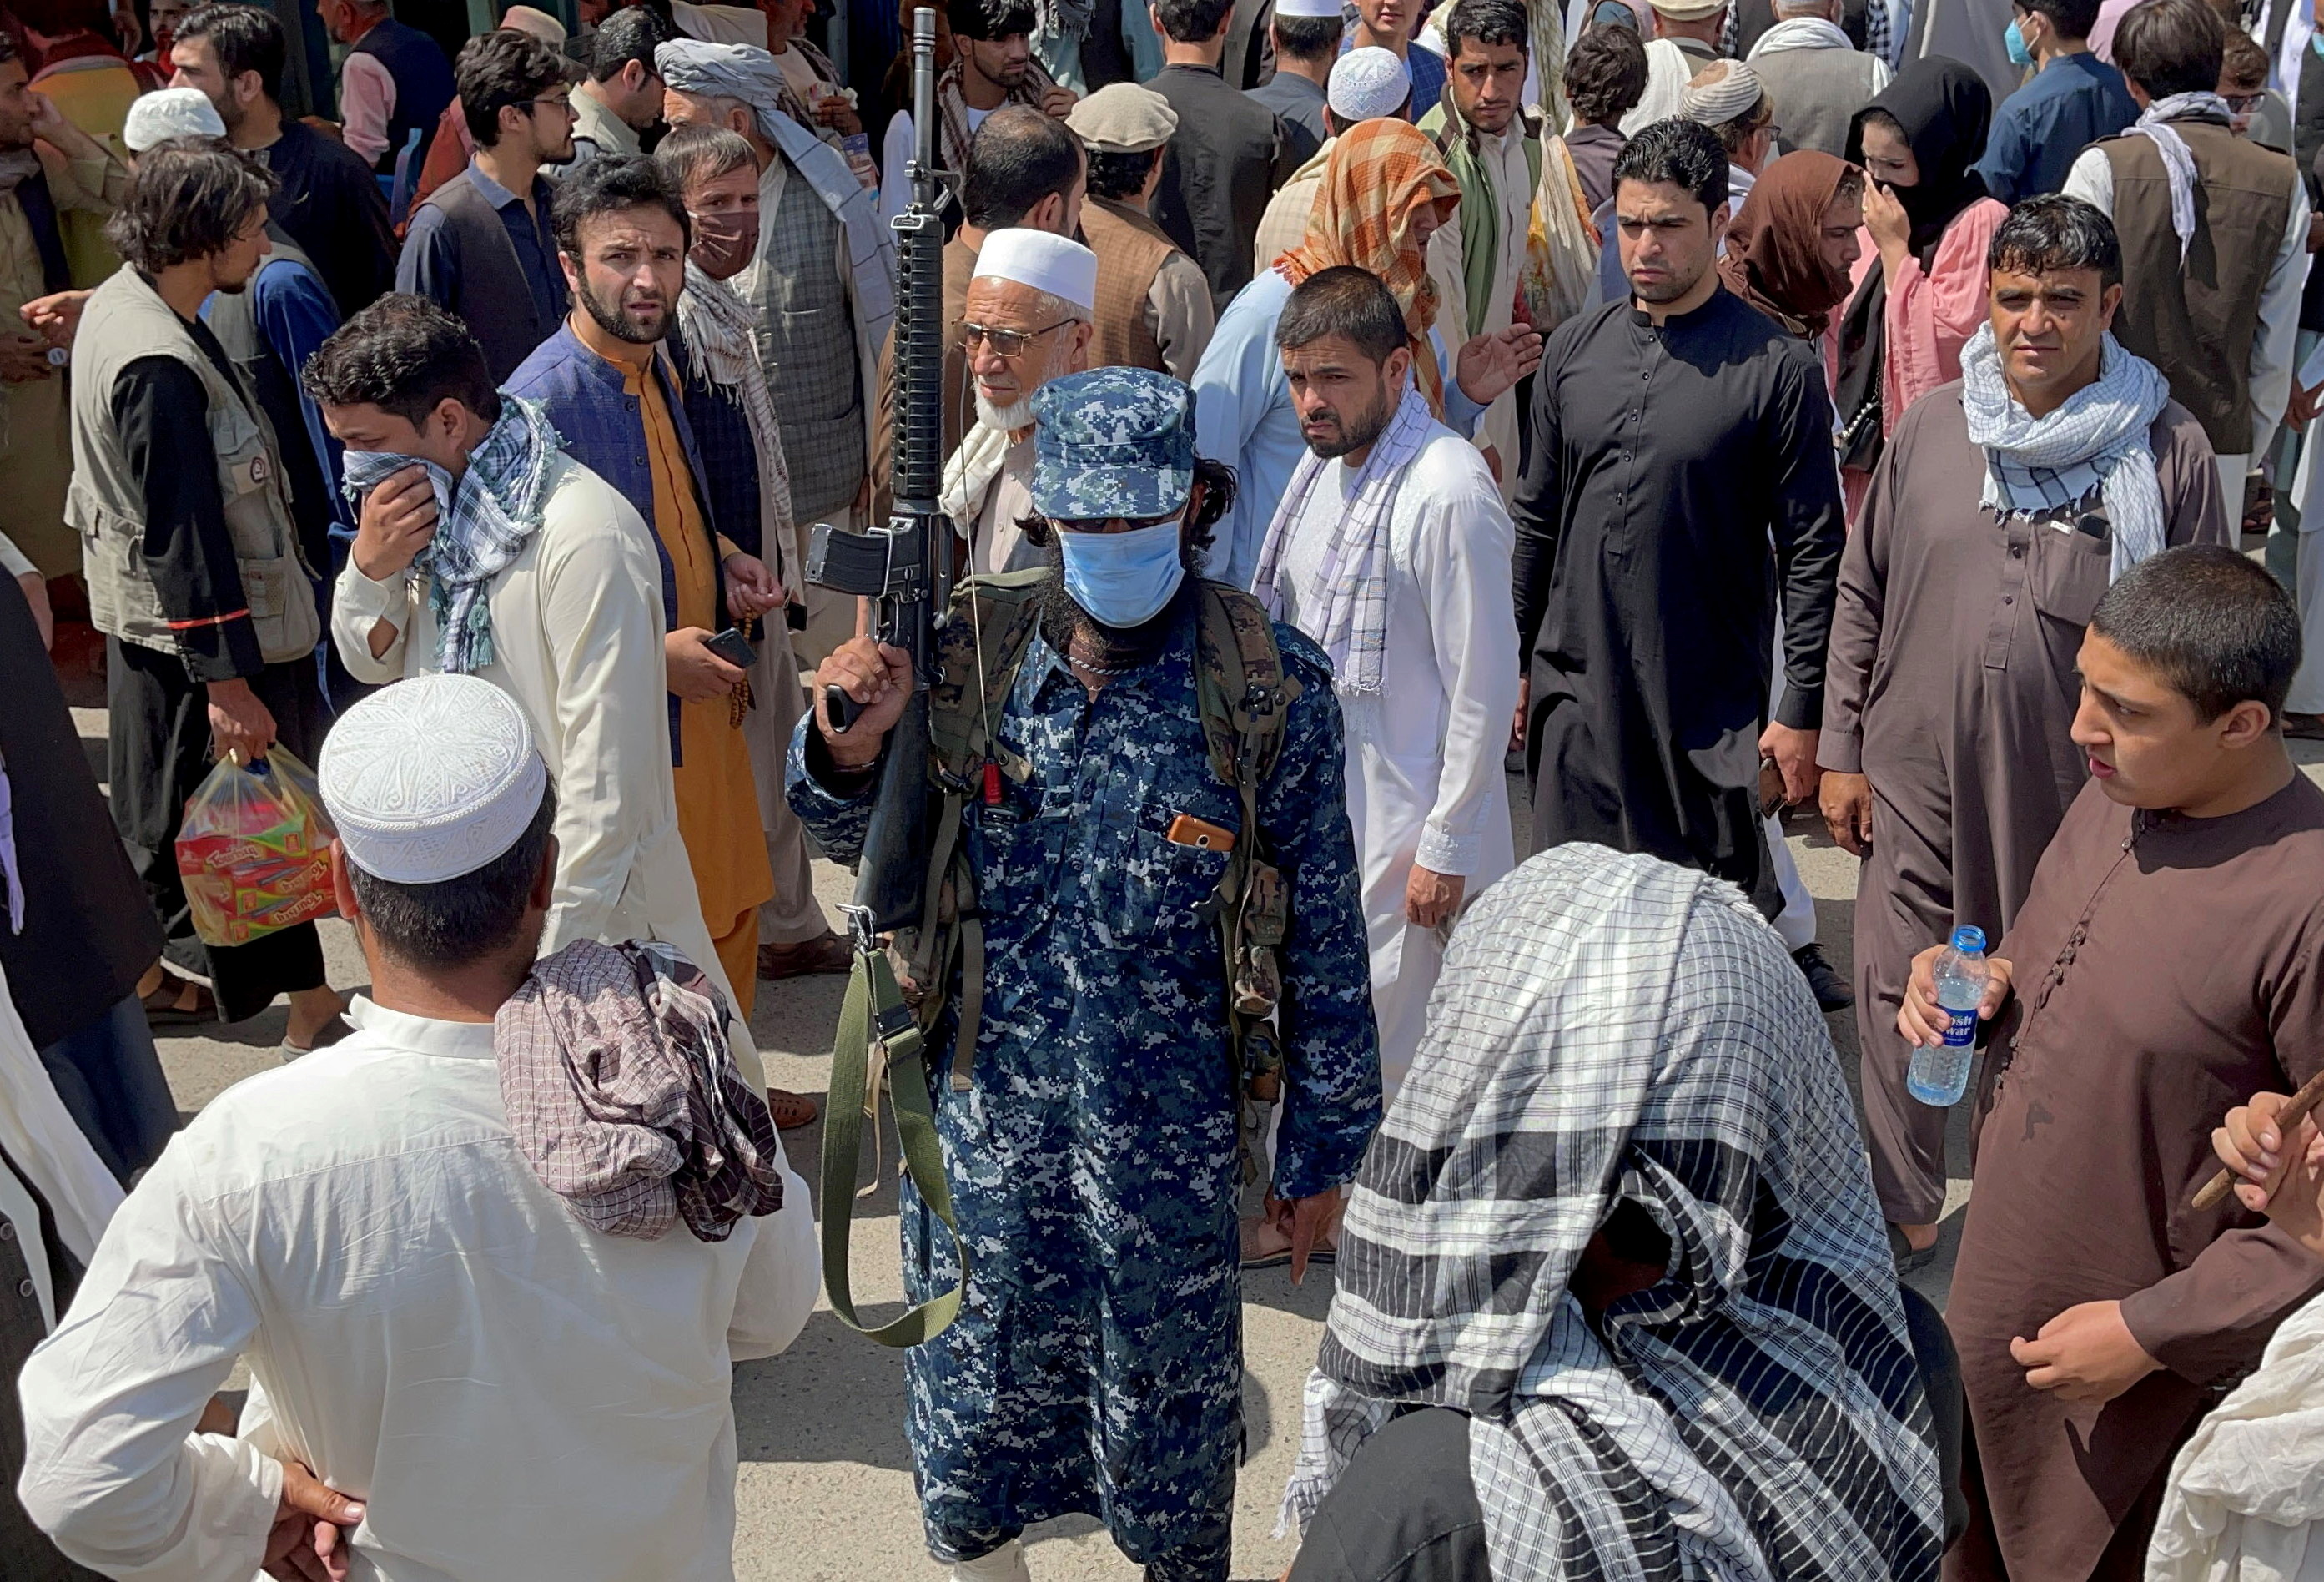 Member of Taliban security forces stands guard among crowds of people in a street in Kabul